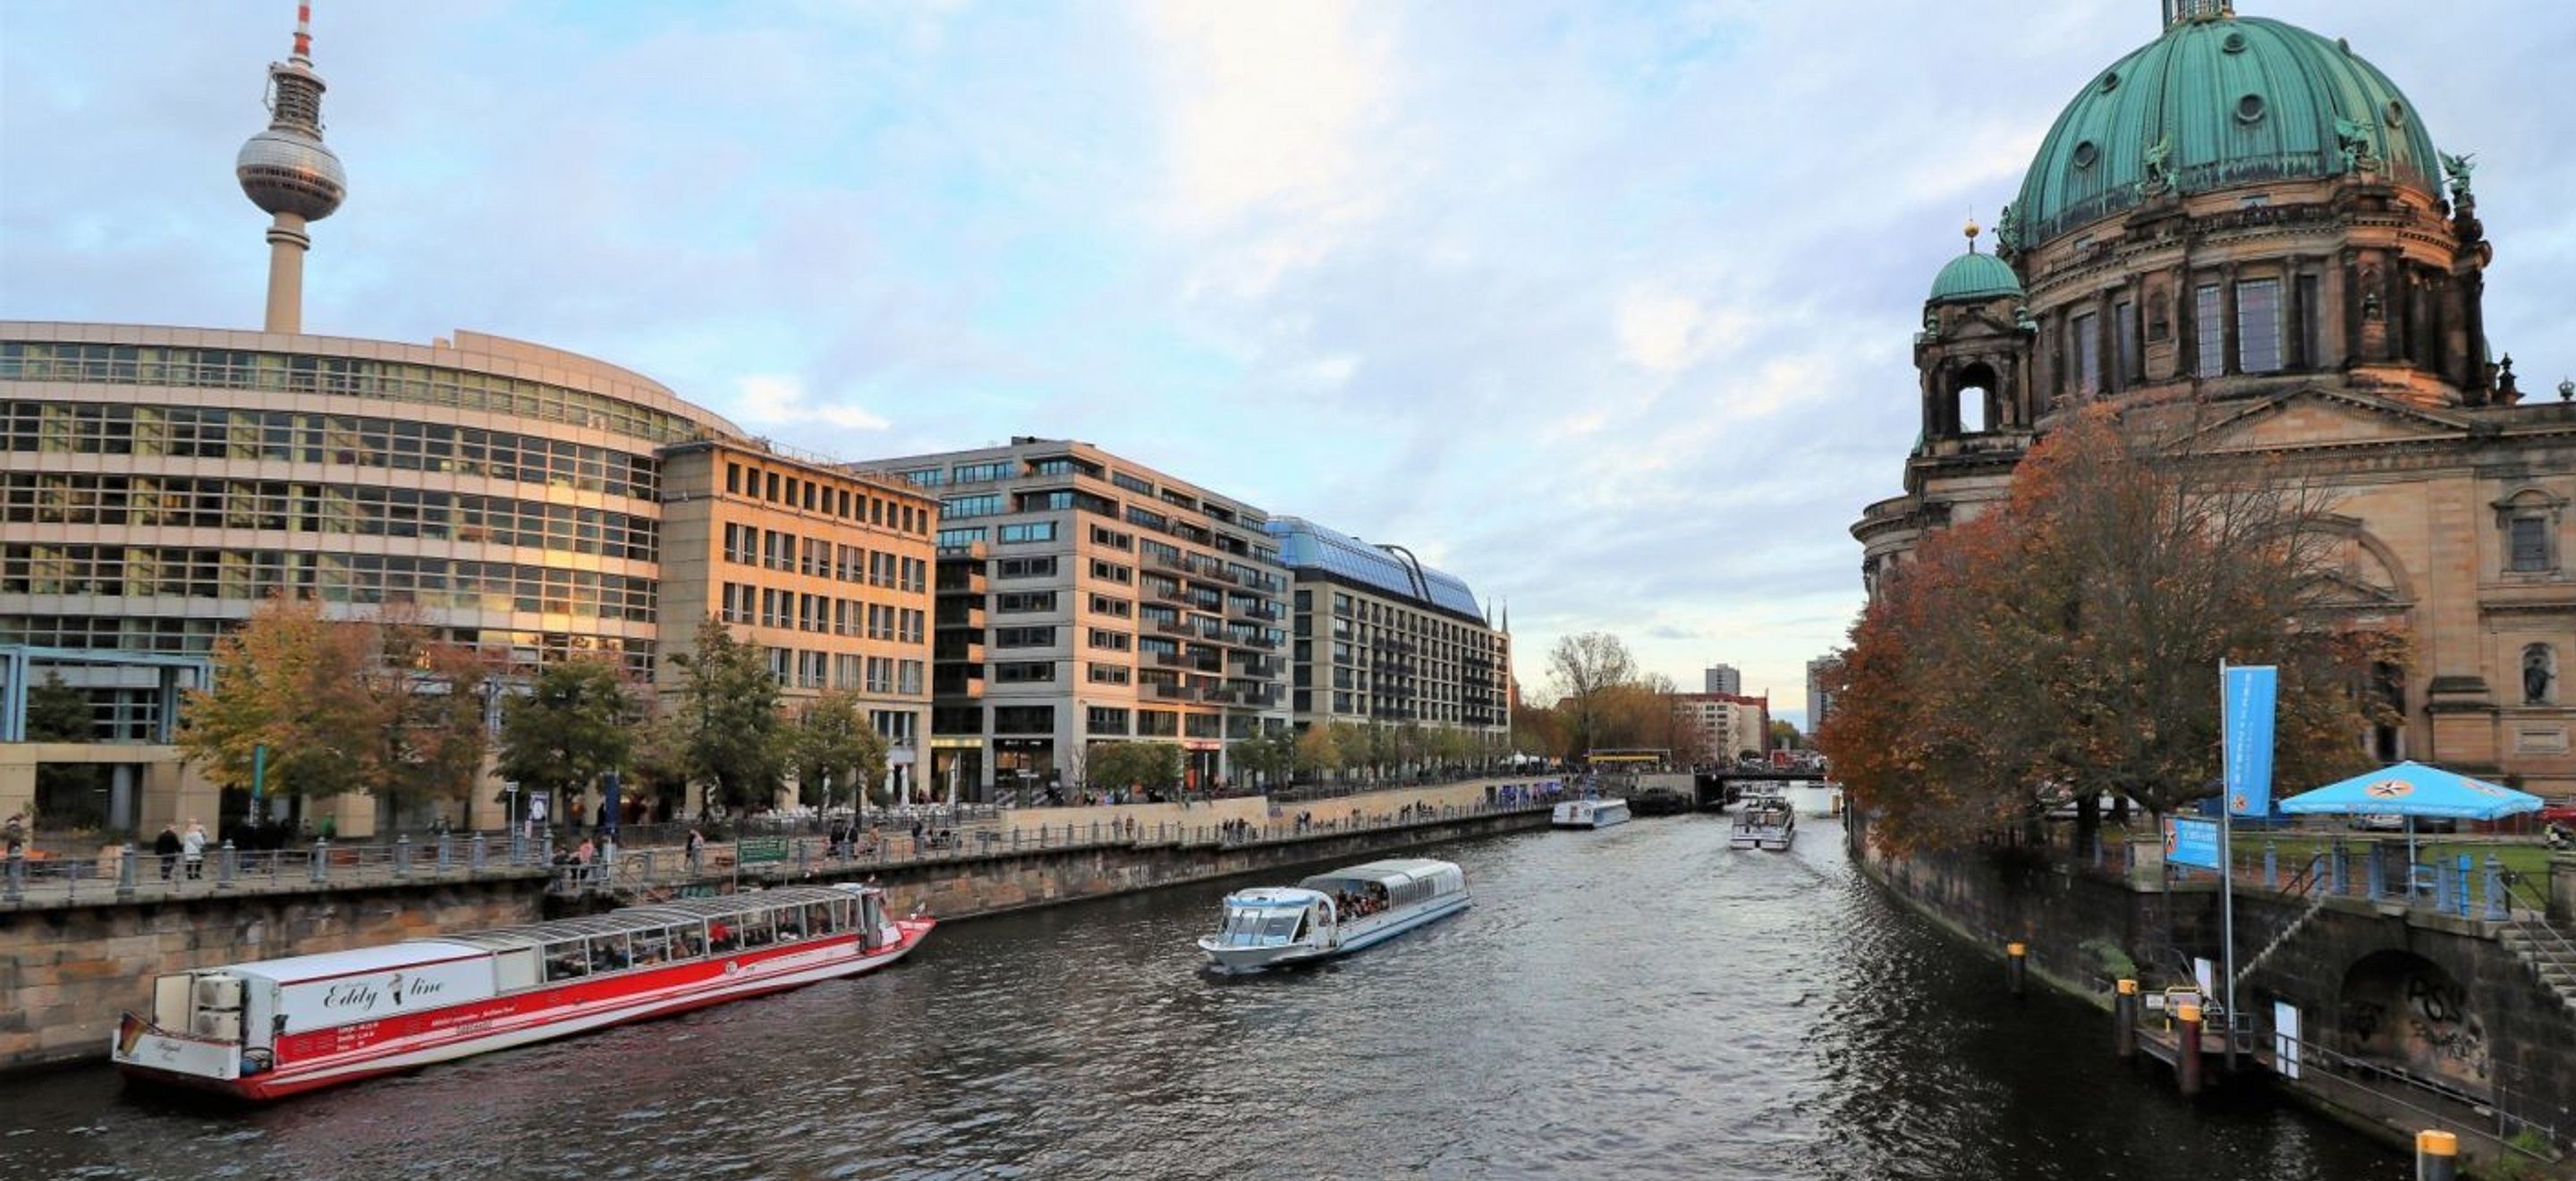 From a bridge over the Spree river in Berlin, Germany, we can see multiple ferry boats on the water. On the left side of the river are modern buildings and the Berlin Television Tower. On the righthand side of the river, is a historic stone building with a green patina dome and a gold spire.